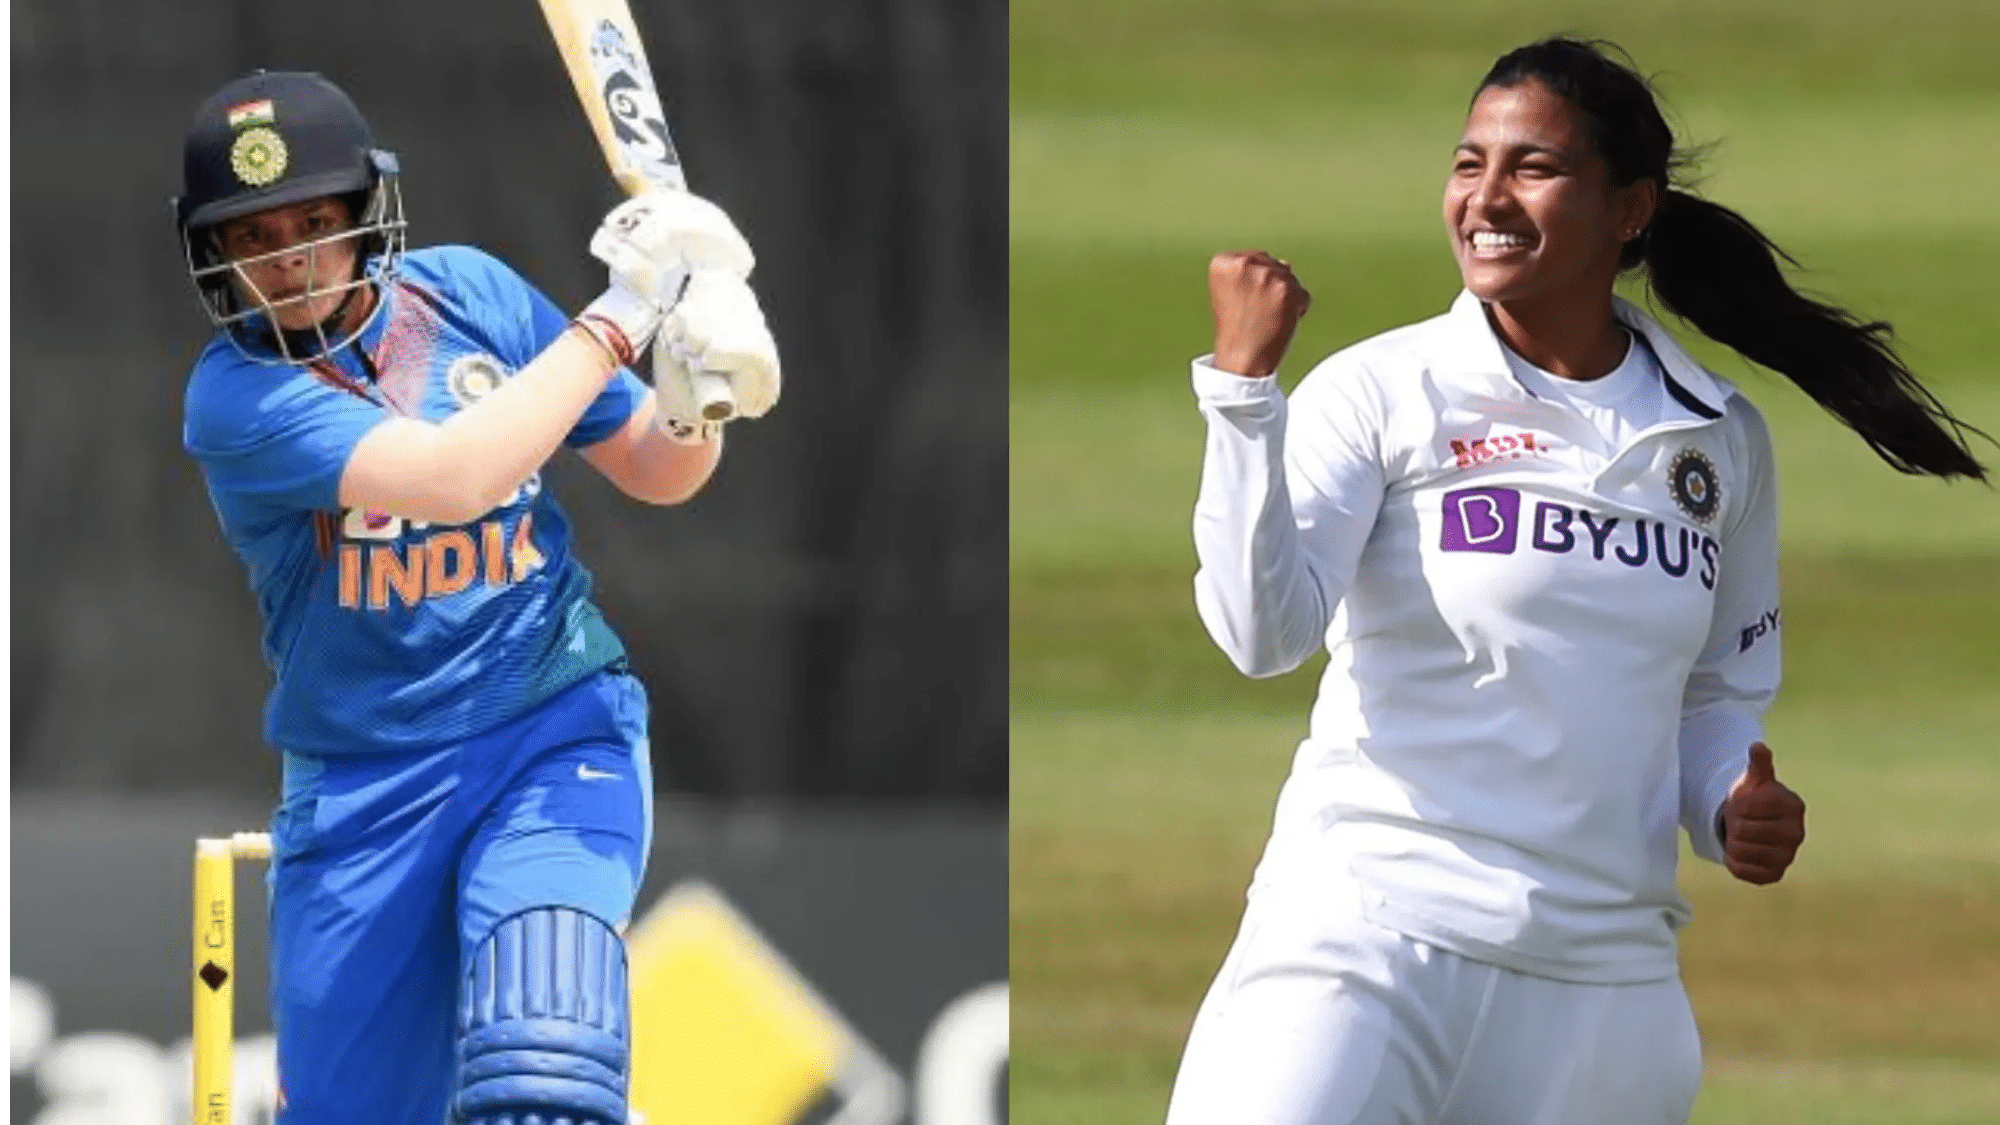 India’s Shafali Verma, Sneh Rana nominated for ICC player of the month